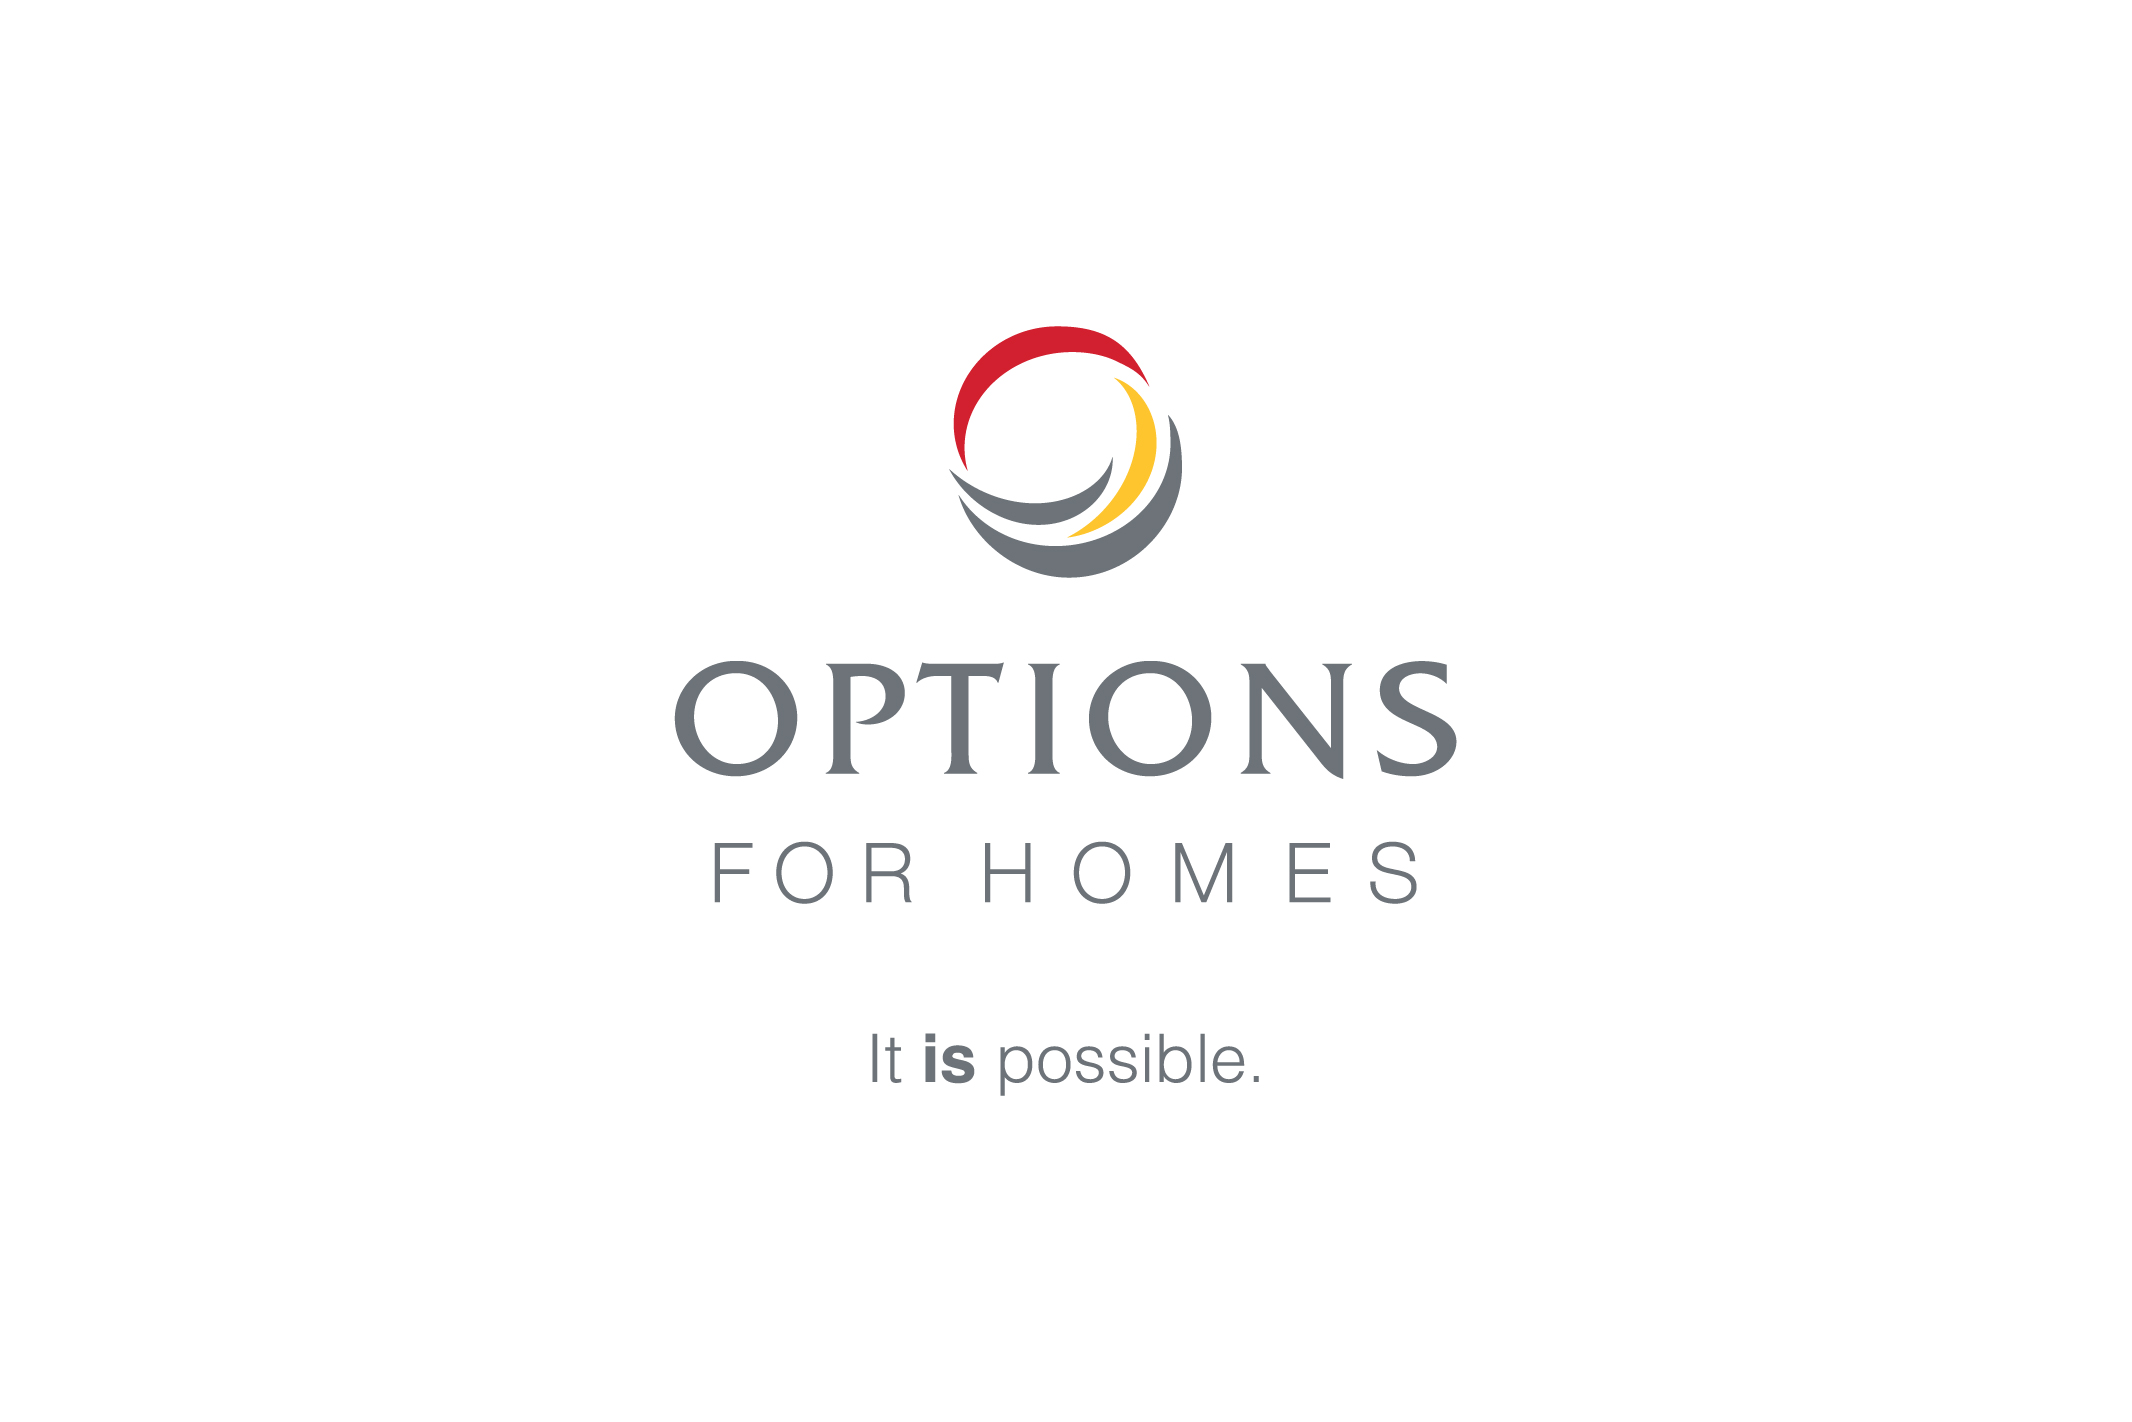 Options for Homes Logo used throughout grassroots campaign